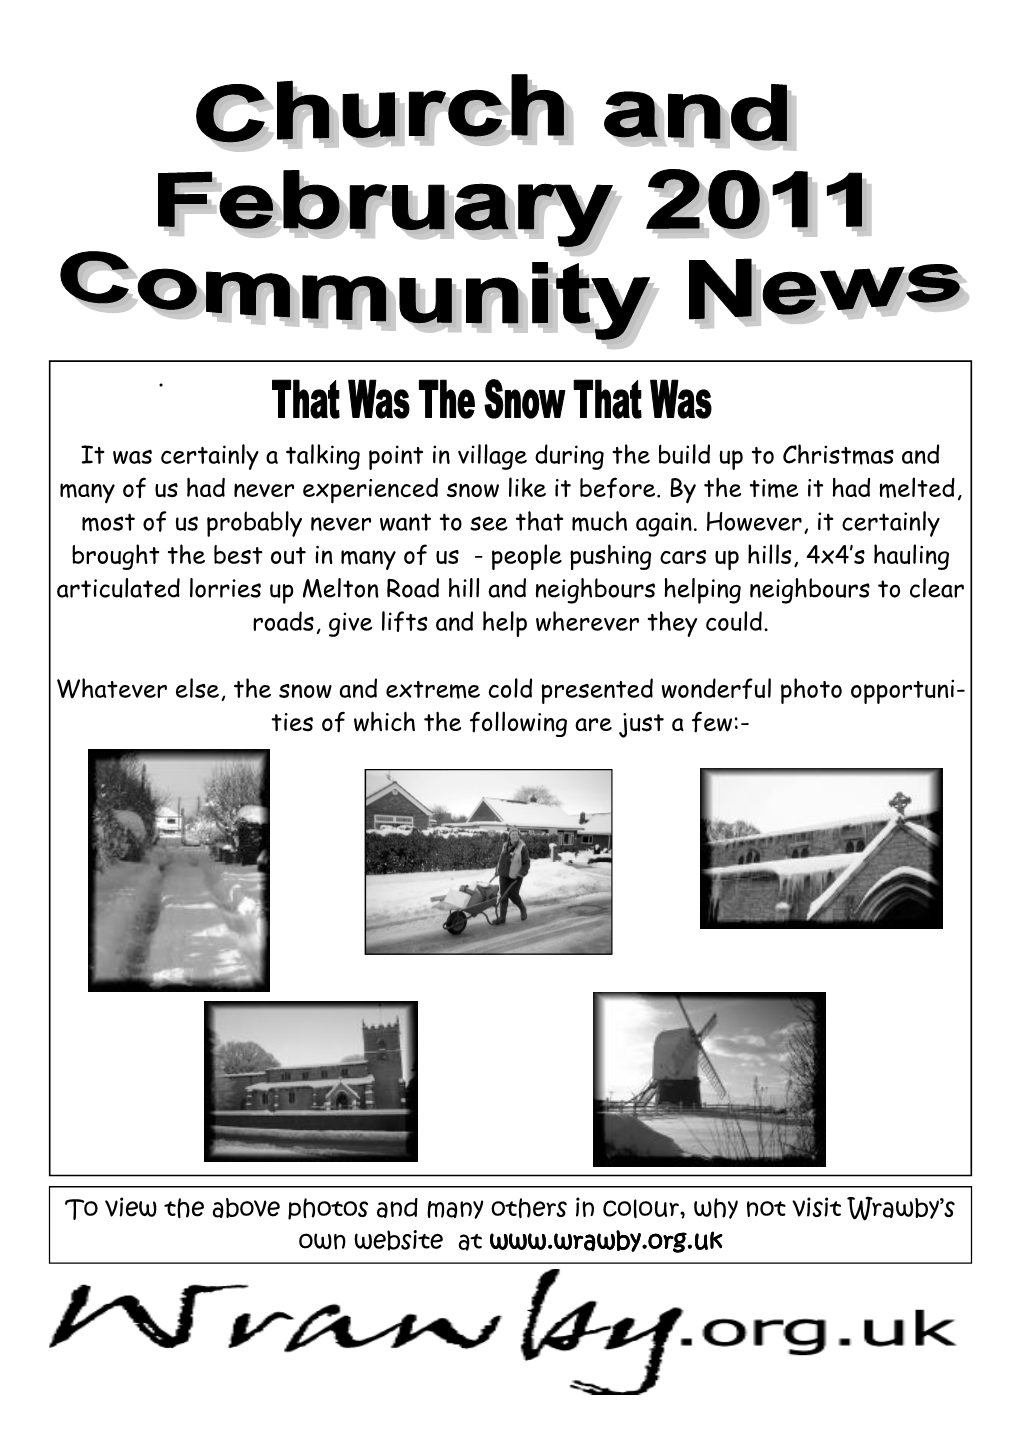 It Was Certainly a Talking Point in Village During the Build up to Christmas and Many of Us Had Never Experienced Snow Like It Before